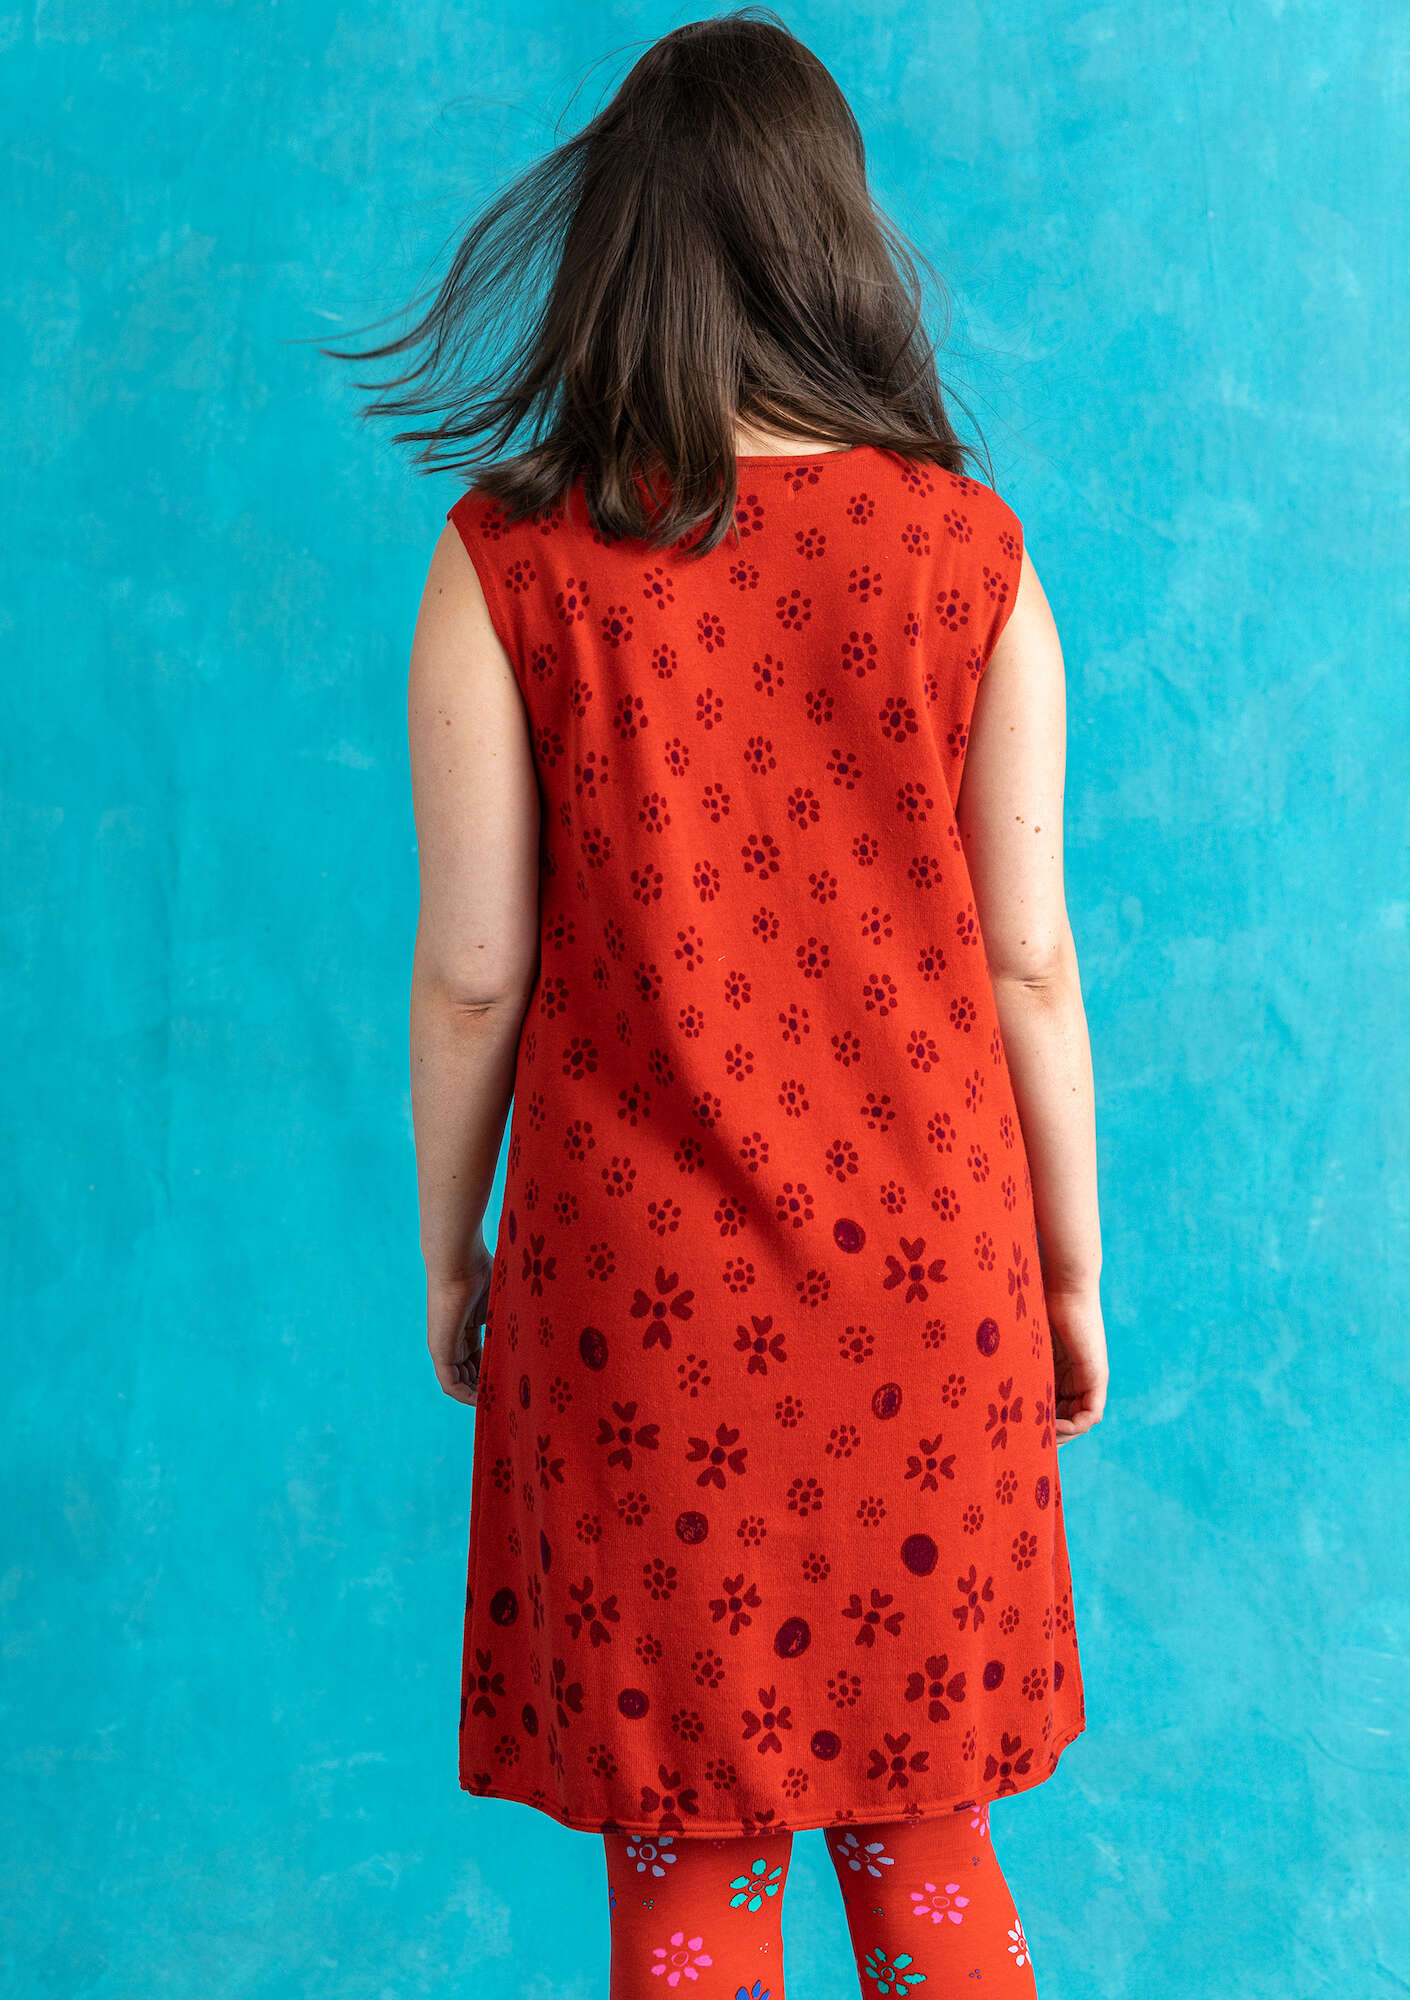 “Iris” knit tunic in organic/recycled cotton parrot red/patterned thumbnail